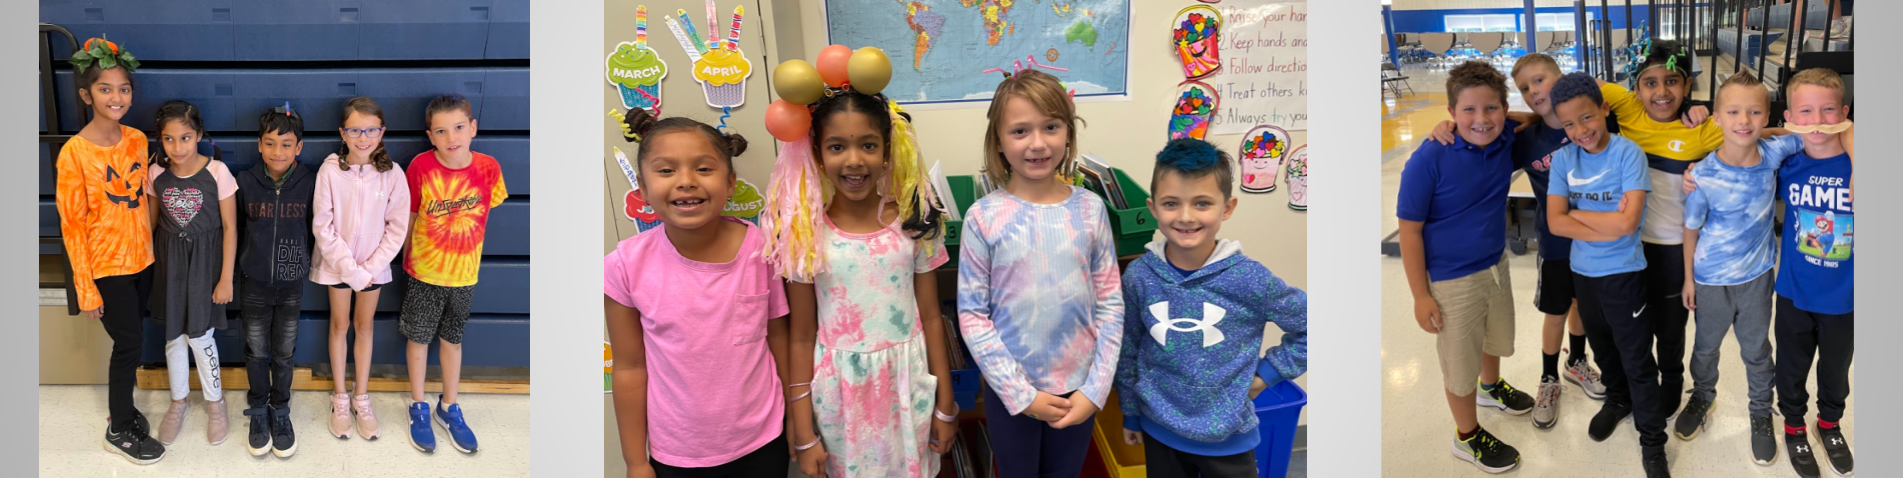 Students posing for crazy hair day